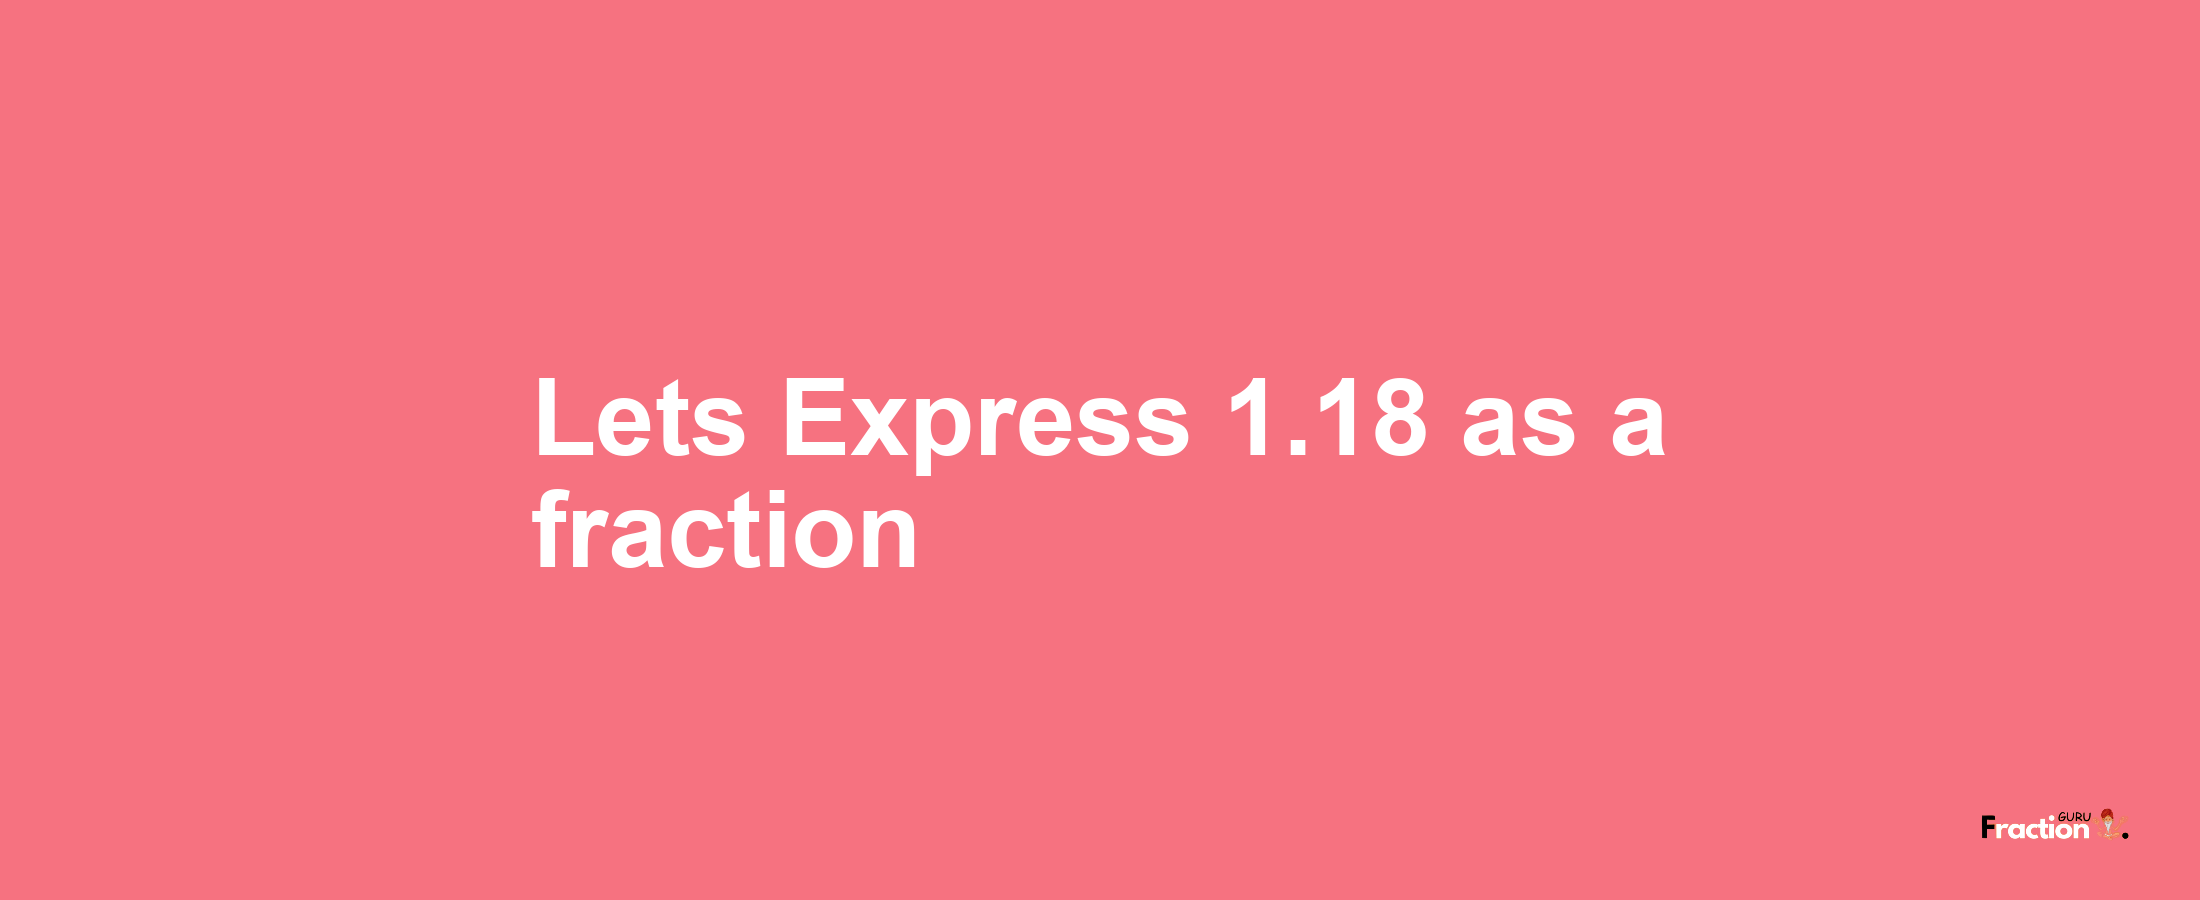 Lets Express 1.18 as afraction